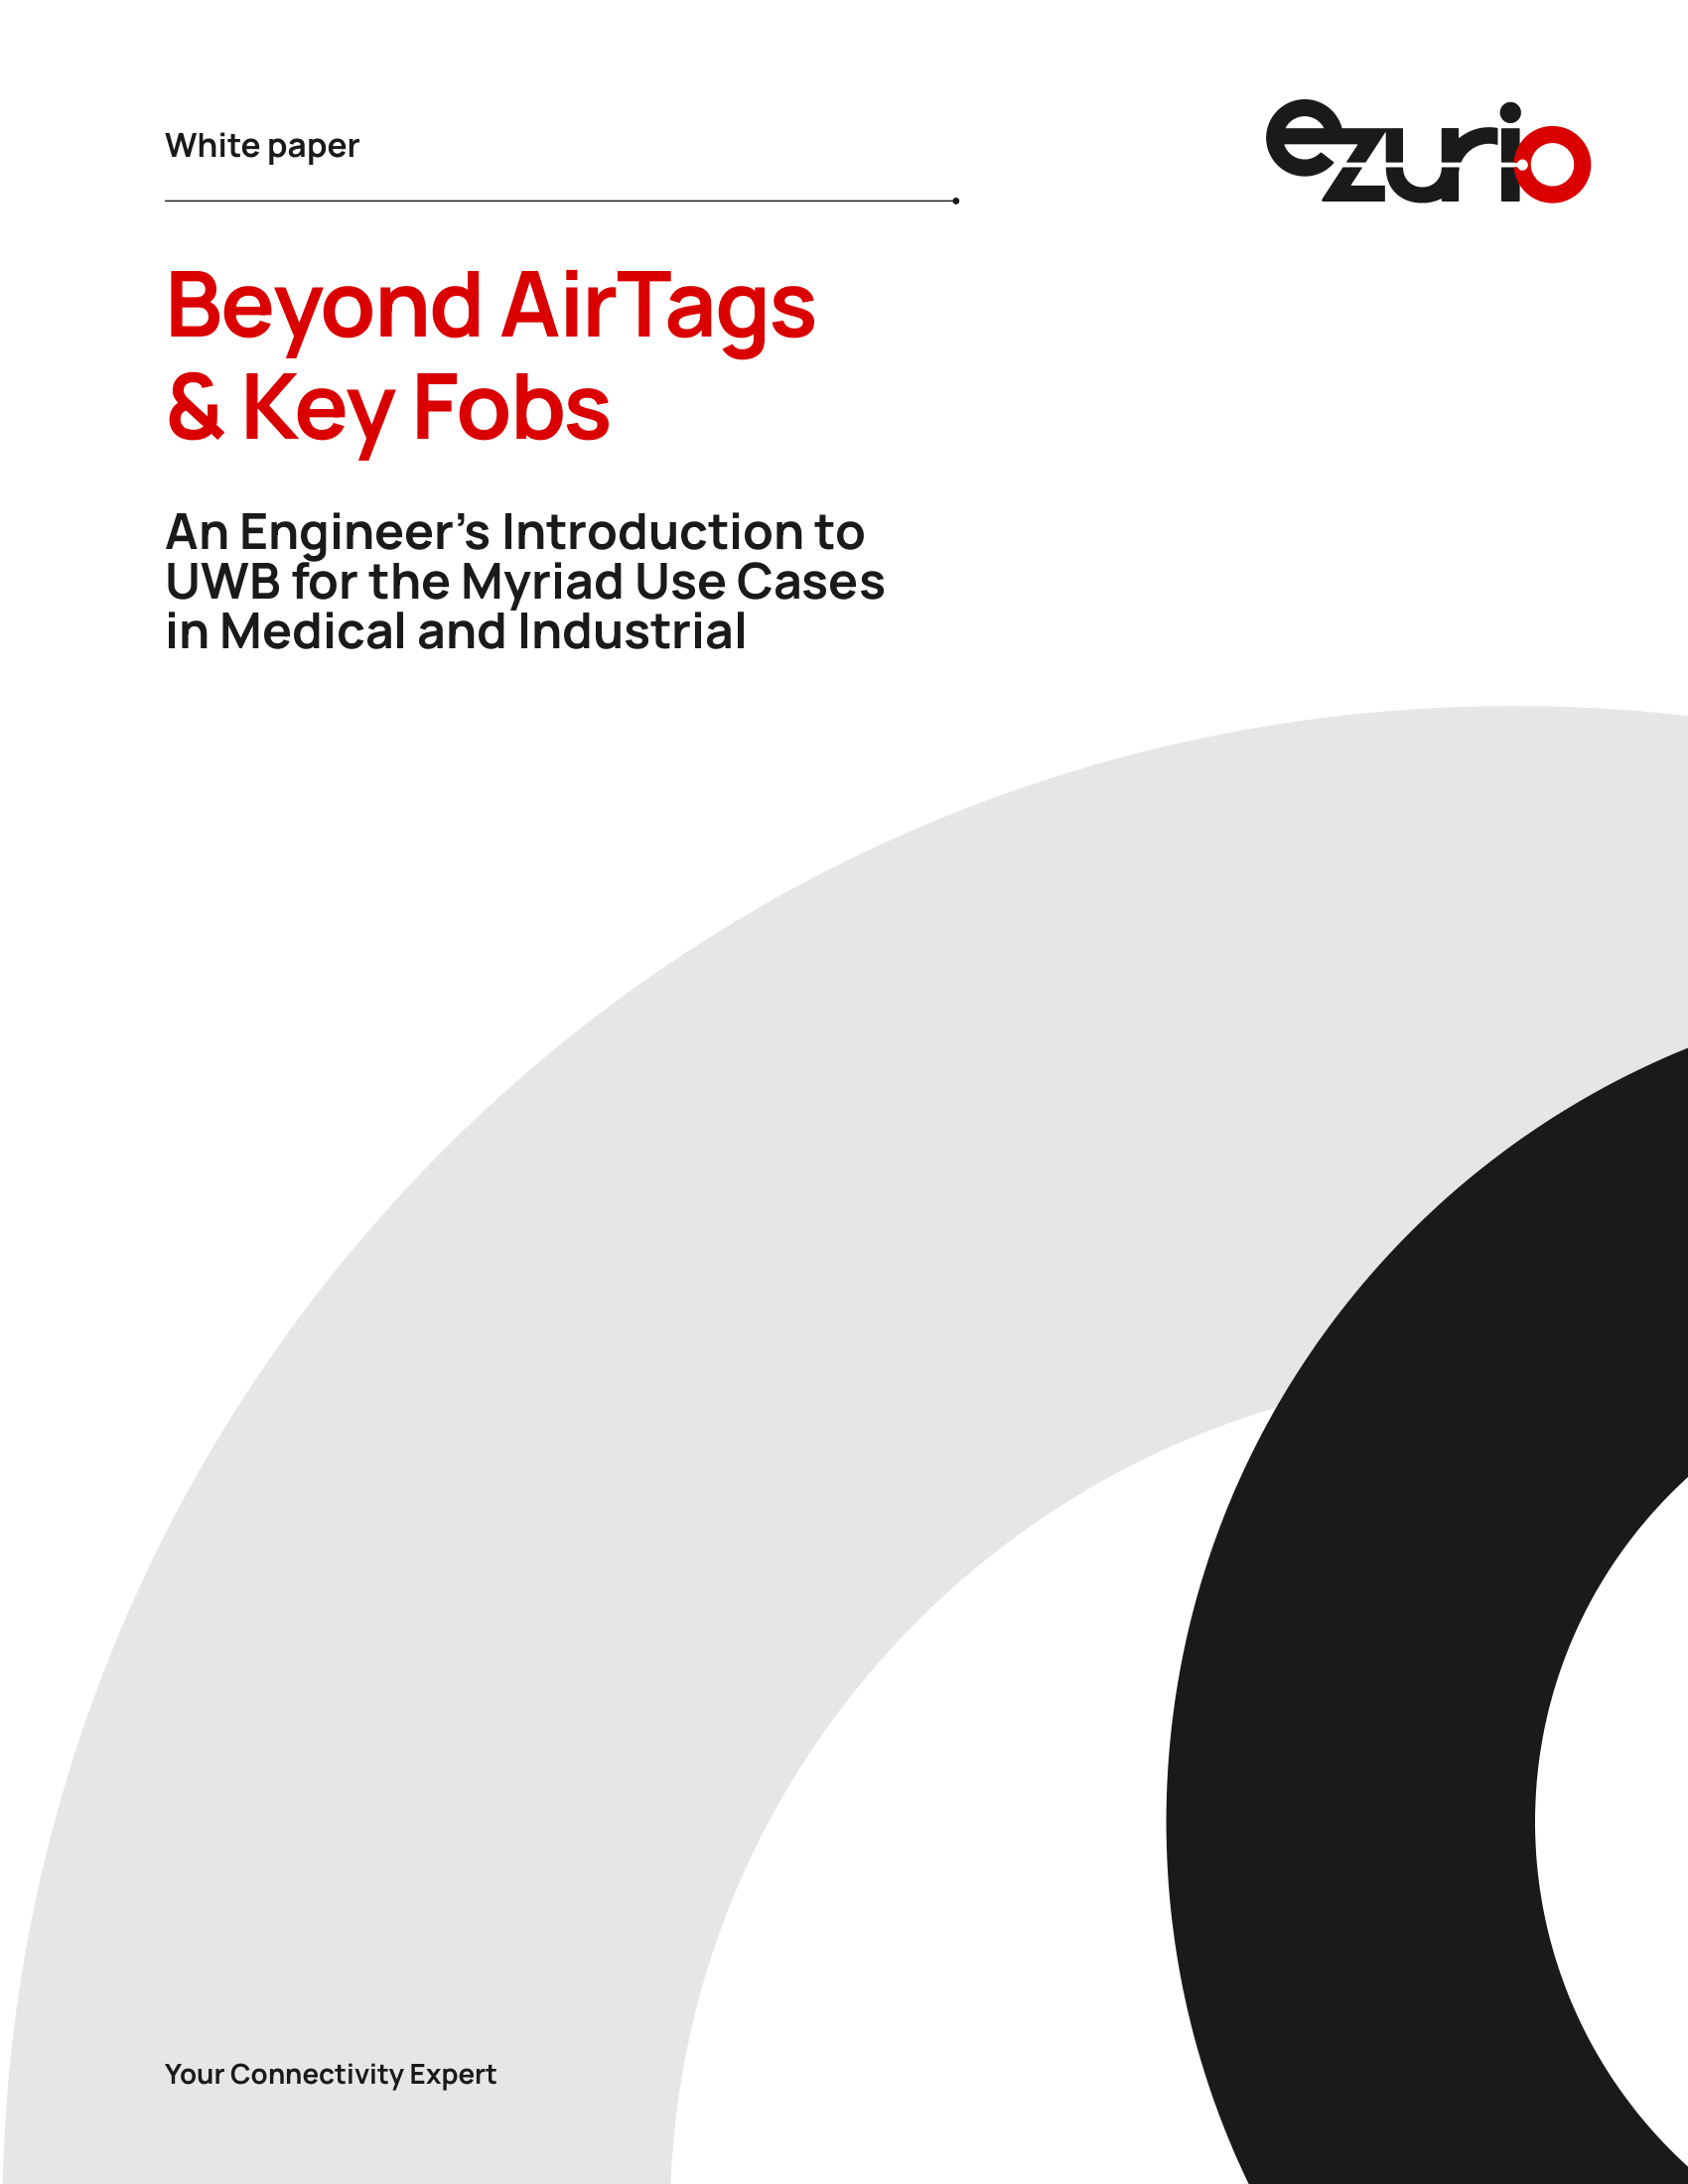 Beyond AirTags & Key Fobs: An Engineer’s Introduction to UWB for the Myriad Use Cases in Medical and Industrial